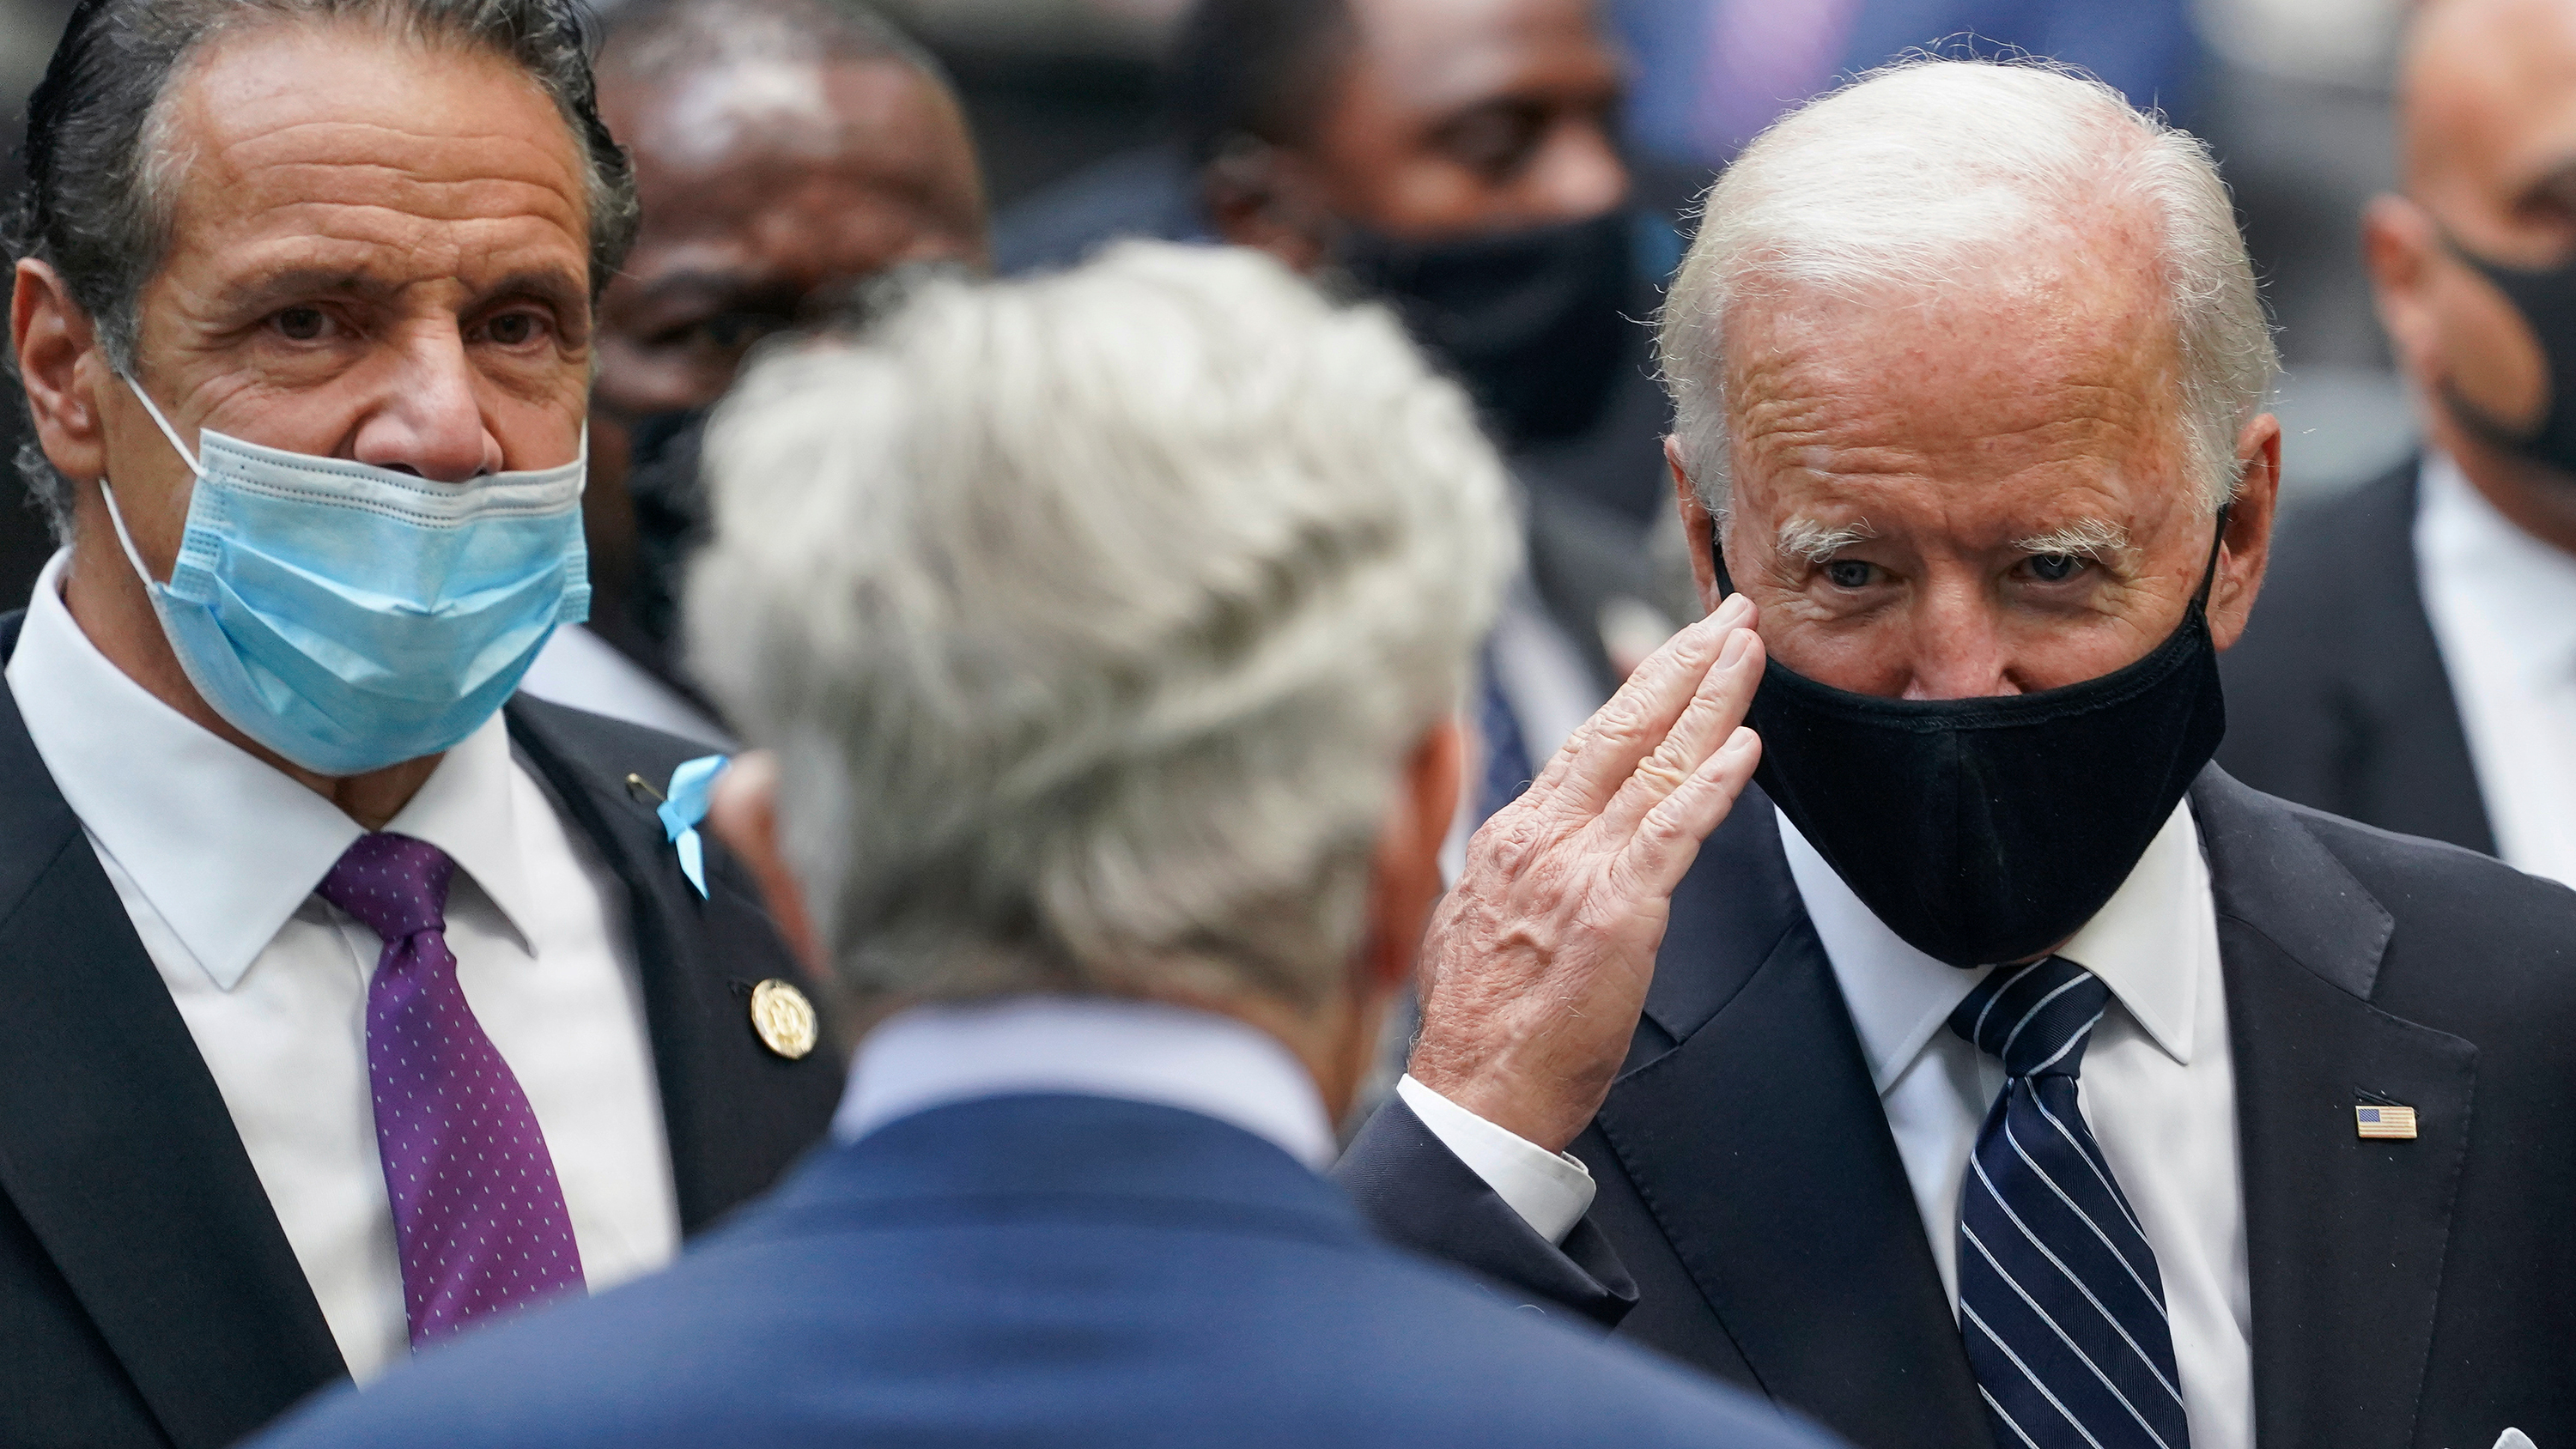 Democratic presidential candidate Joe Biden salutes a guest alongside New York Gov. Andrew Cuomo, left, at the National September 11 Memorial and Museum in New York on September 11.